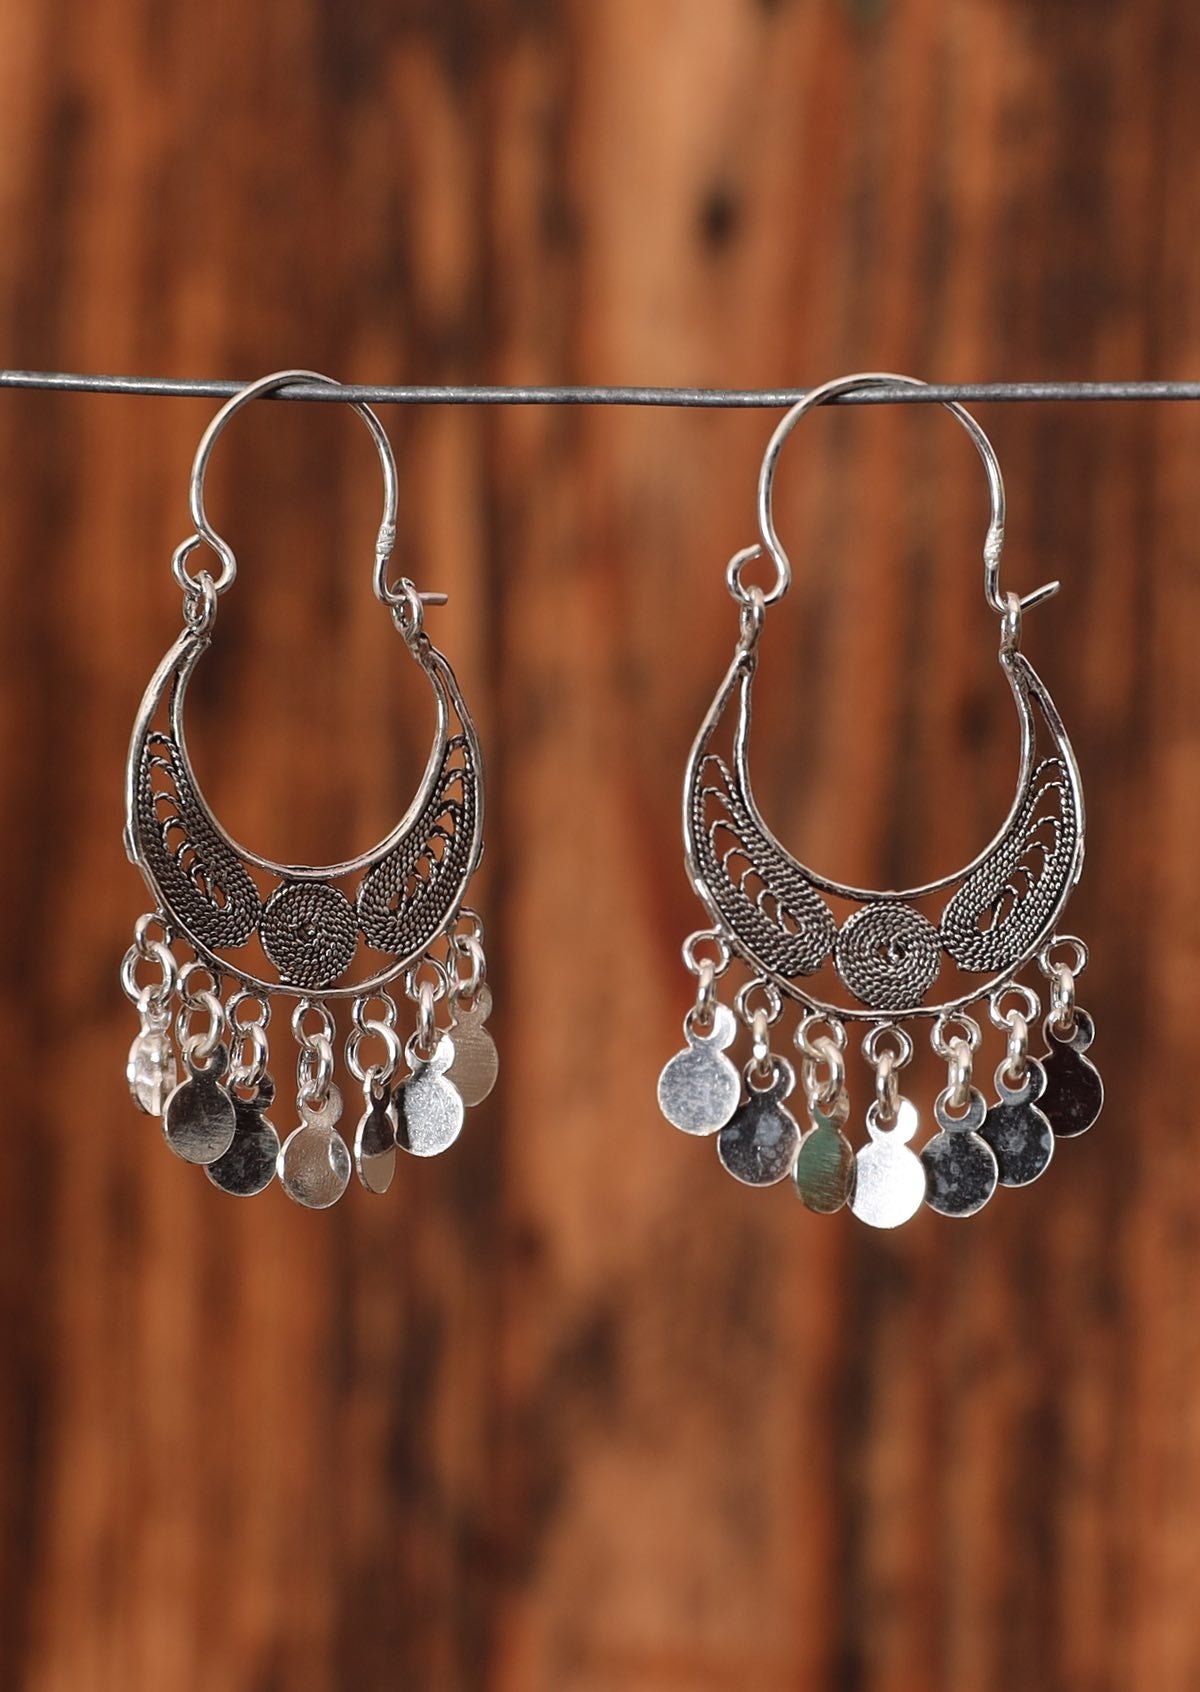 92.5% silver gypsy style earrings with dangling circular components sitting on a wire for display.